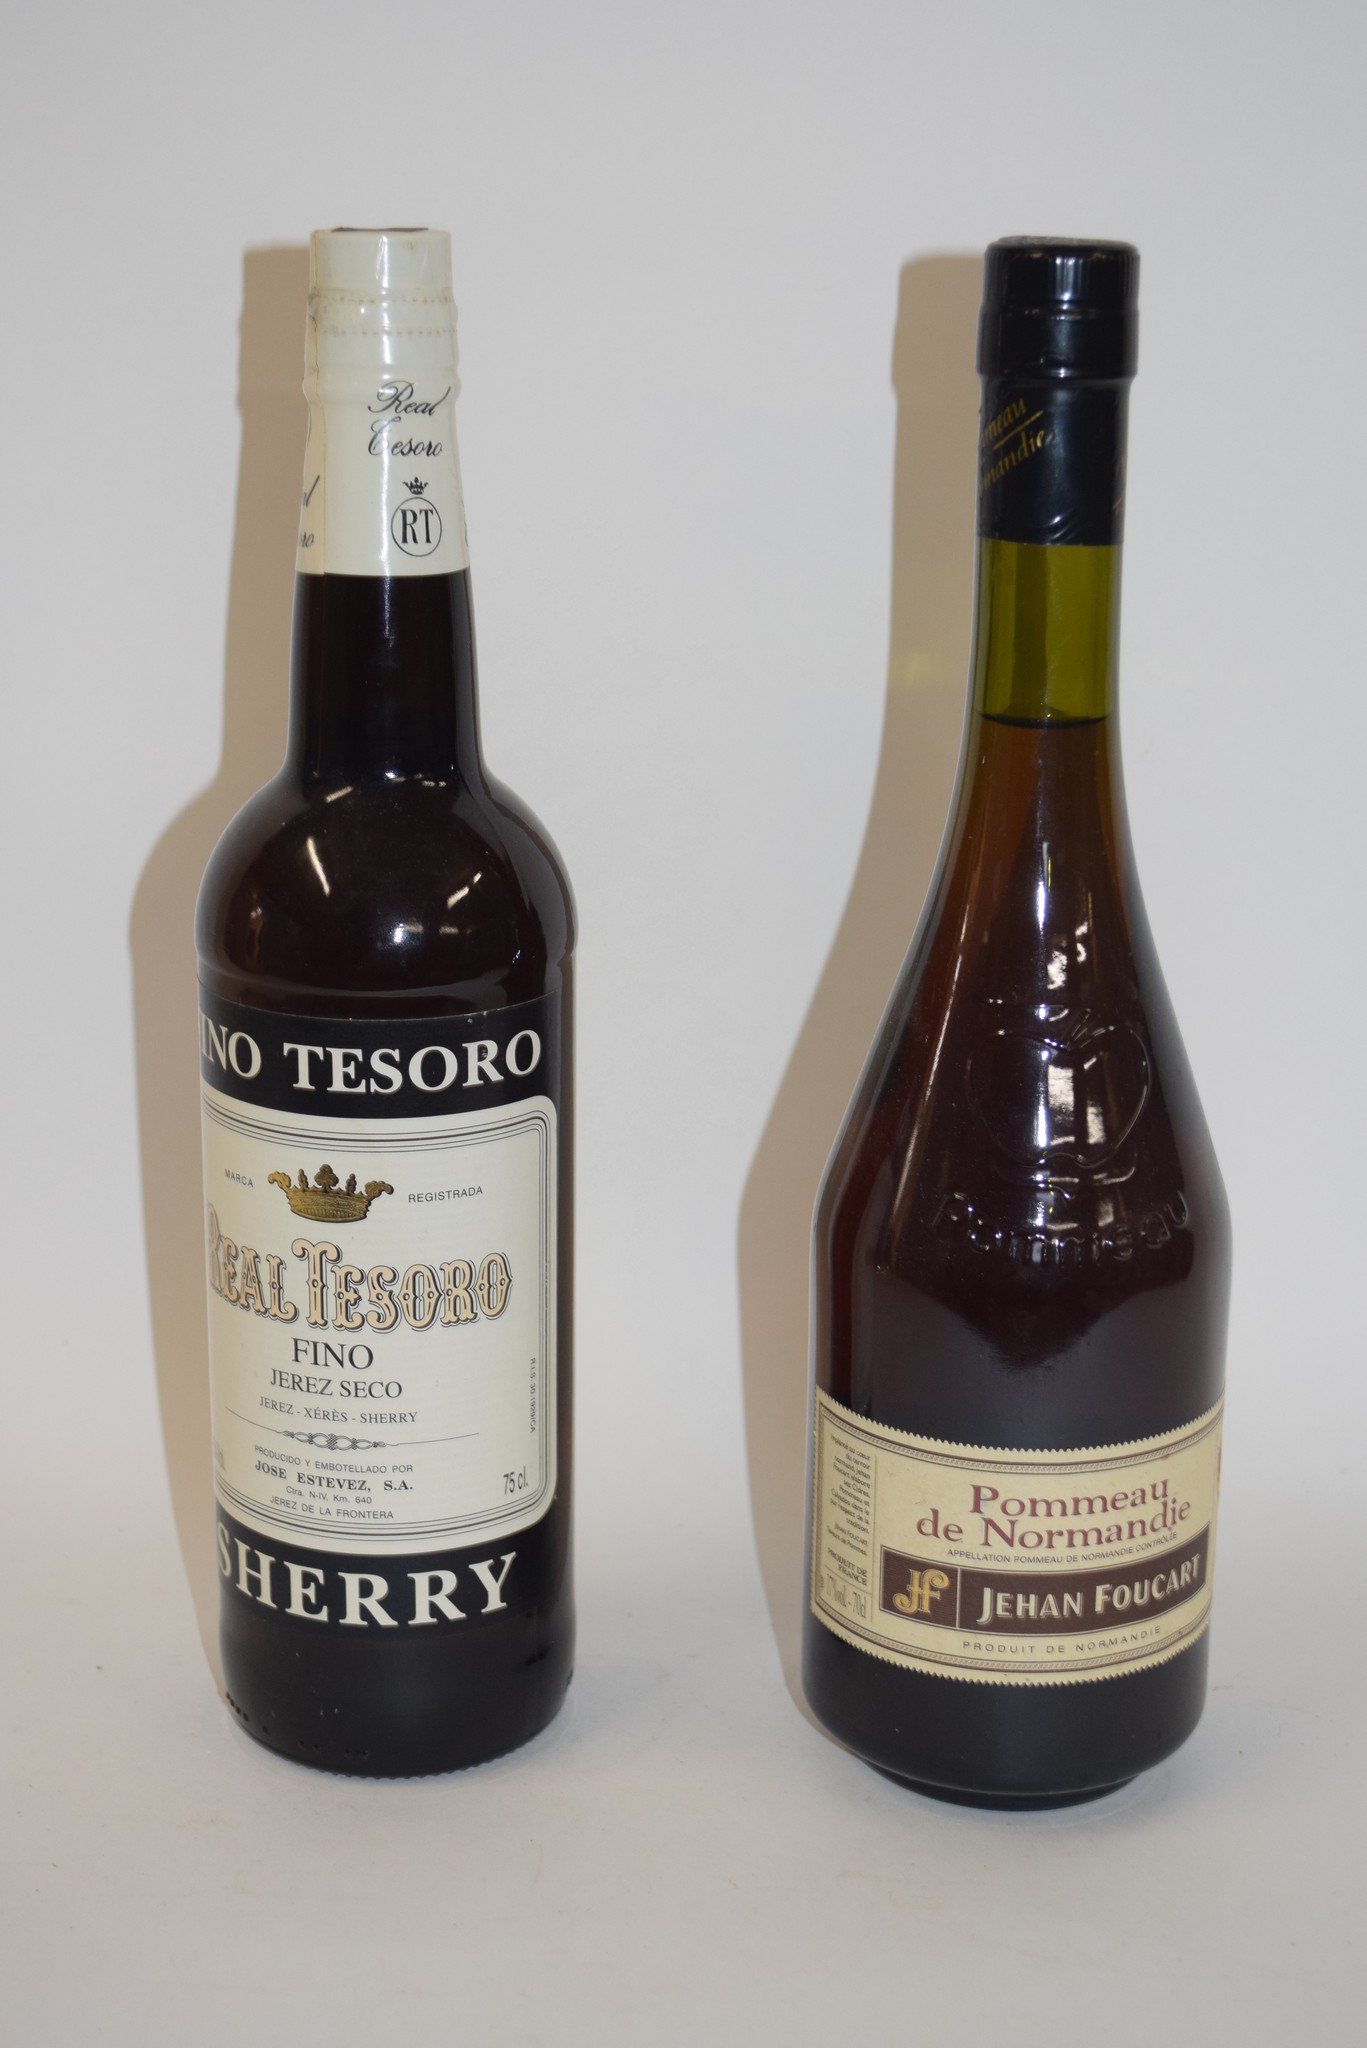 Bottle of Real Tesoro Fino Sherry, 75cl (15%), together with a bottle of Pommeau de Normandie, 70cl,